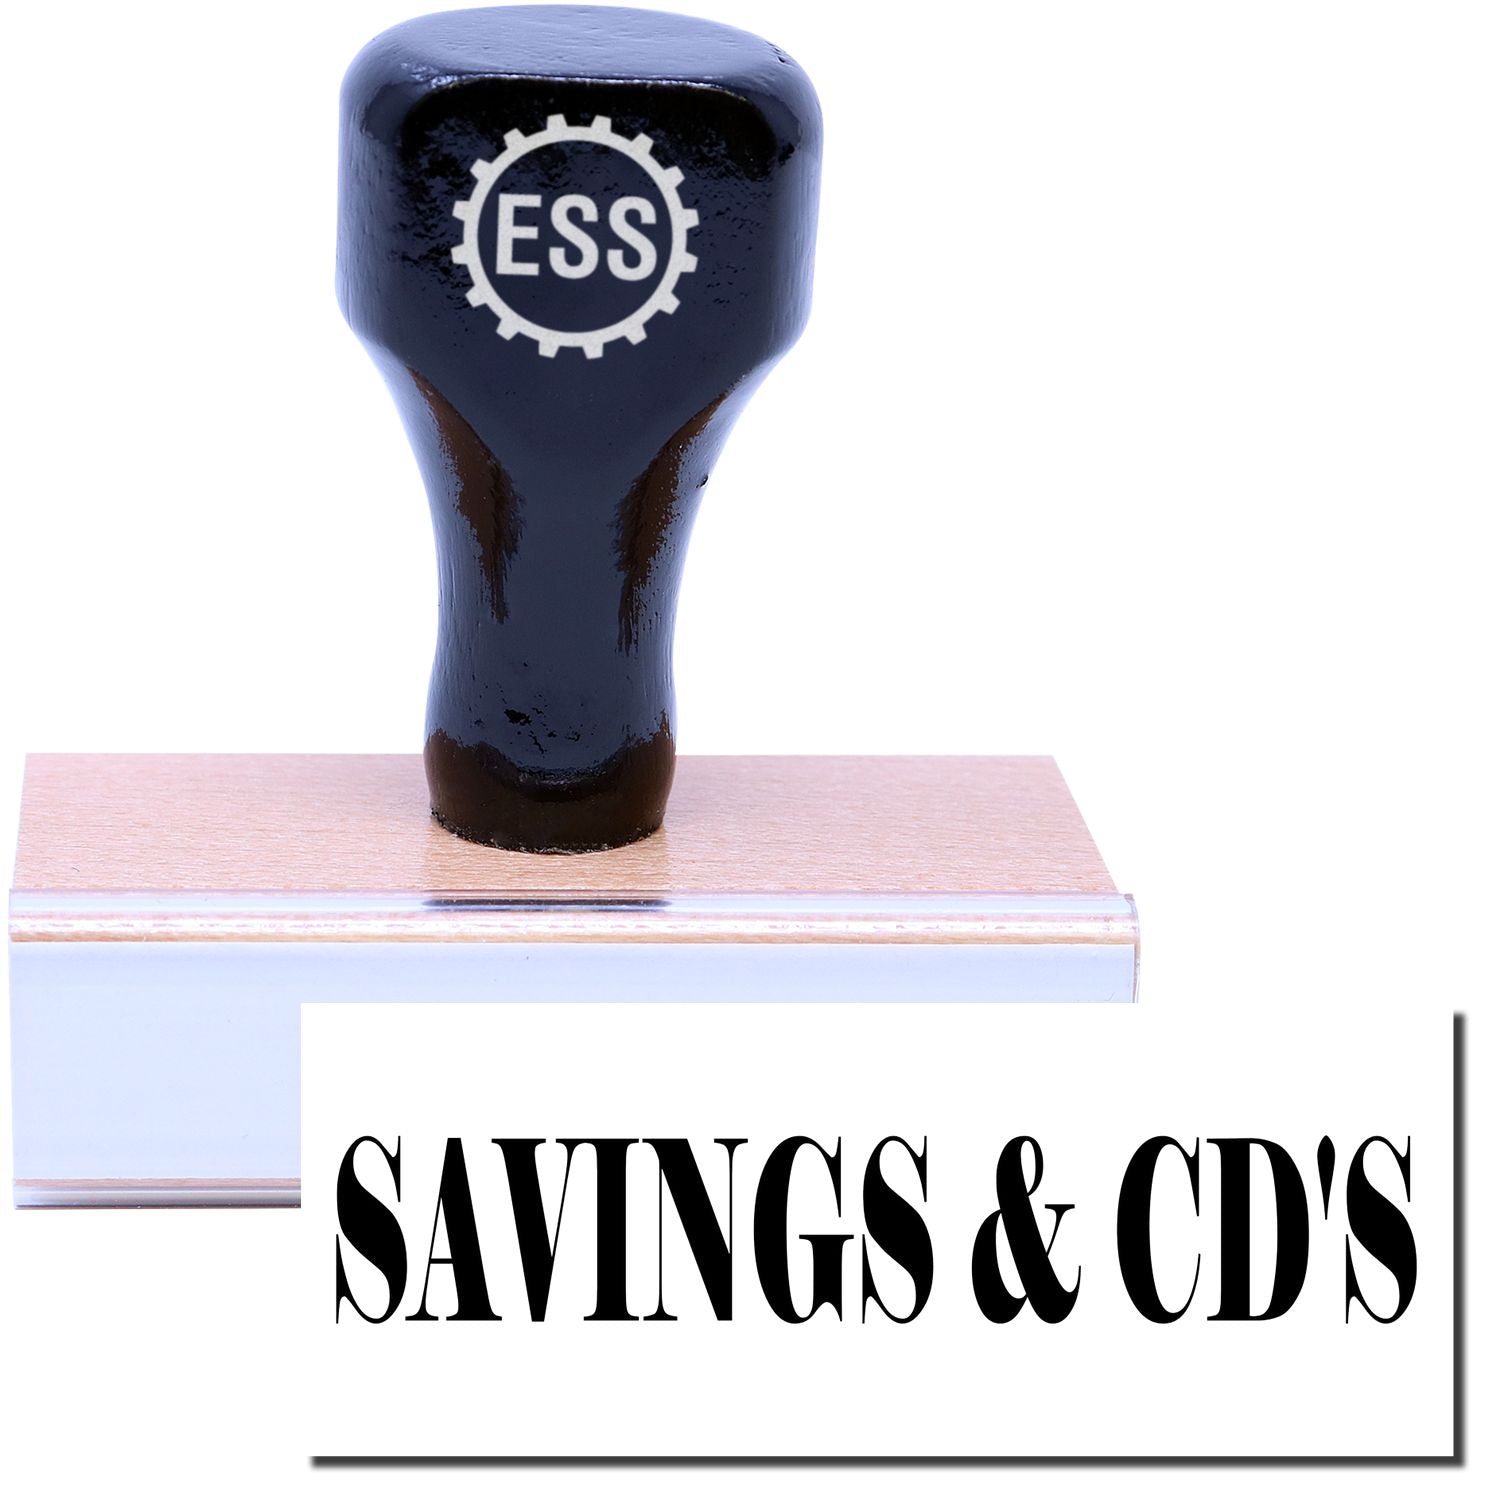 A stock office rubber stamp with a stamped image showing how the text "SAVINGS & CD'S" in a large font is displayed after stamping.